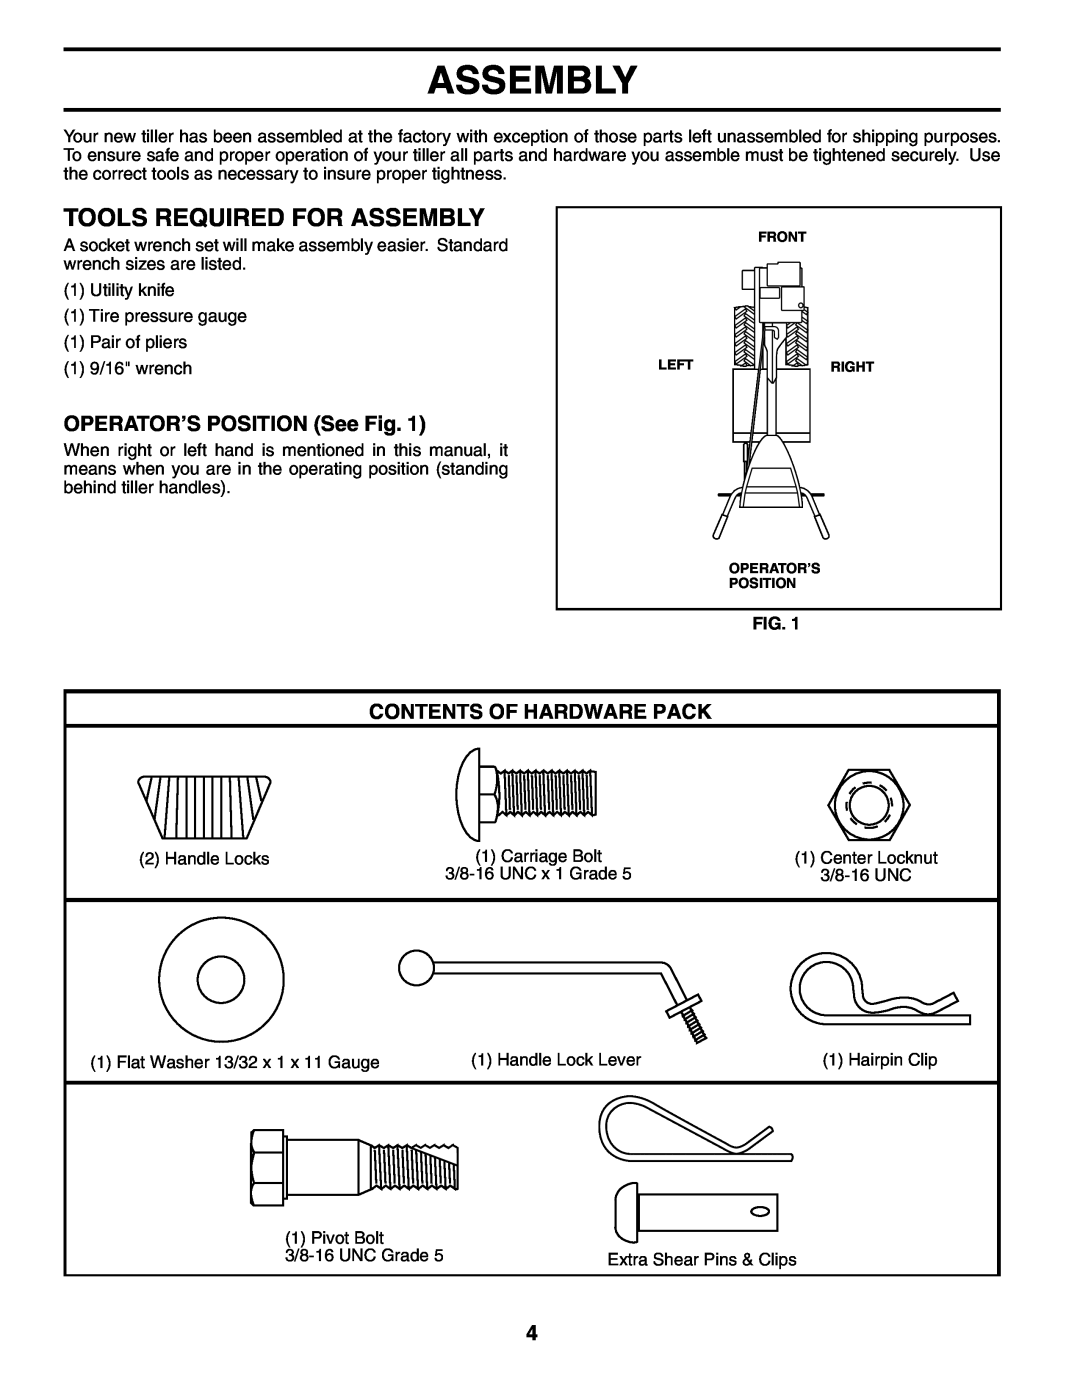 Husqvarna 500RTTA owner manual Tools Required For Assembly, OPERATOR’S POSITION See Fig, Contents Of Hardware Pack 